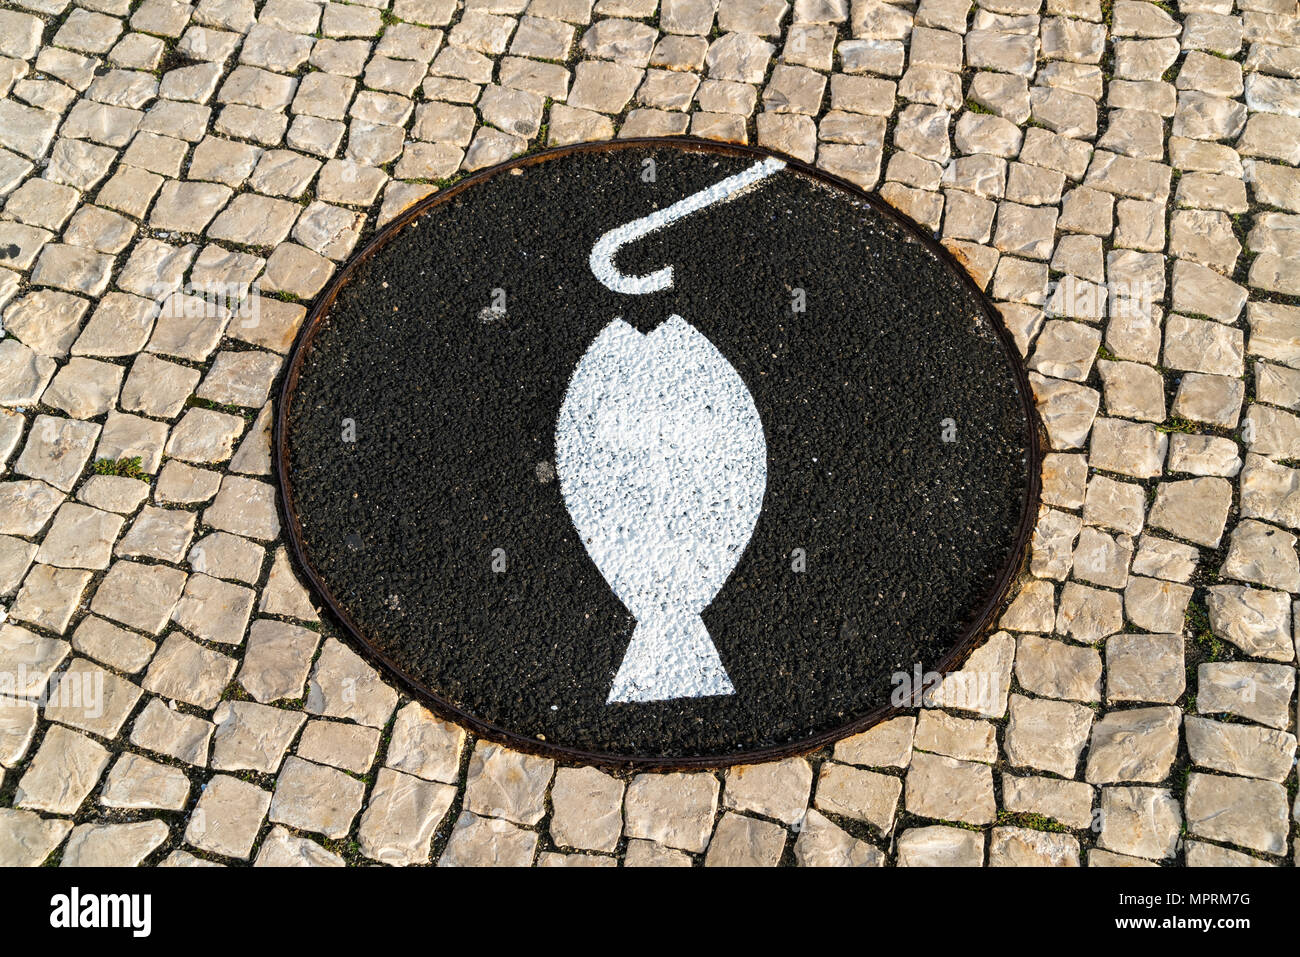 Portugal, Lisbon, fishing sign on the ground Stock Photo